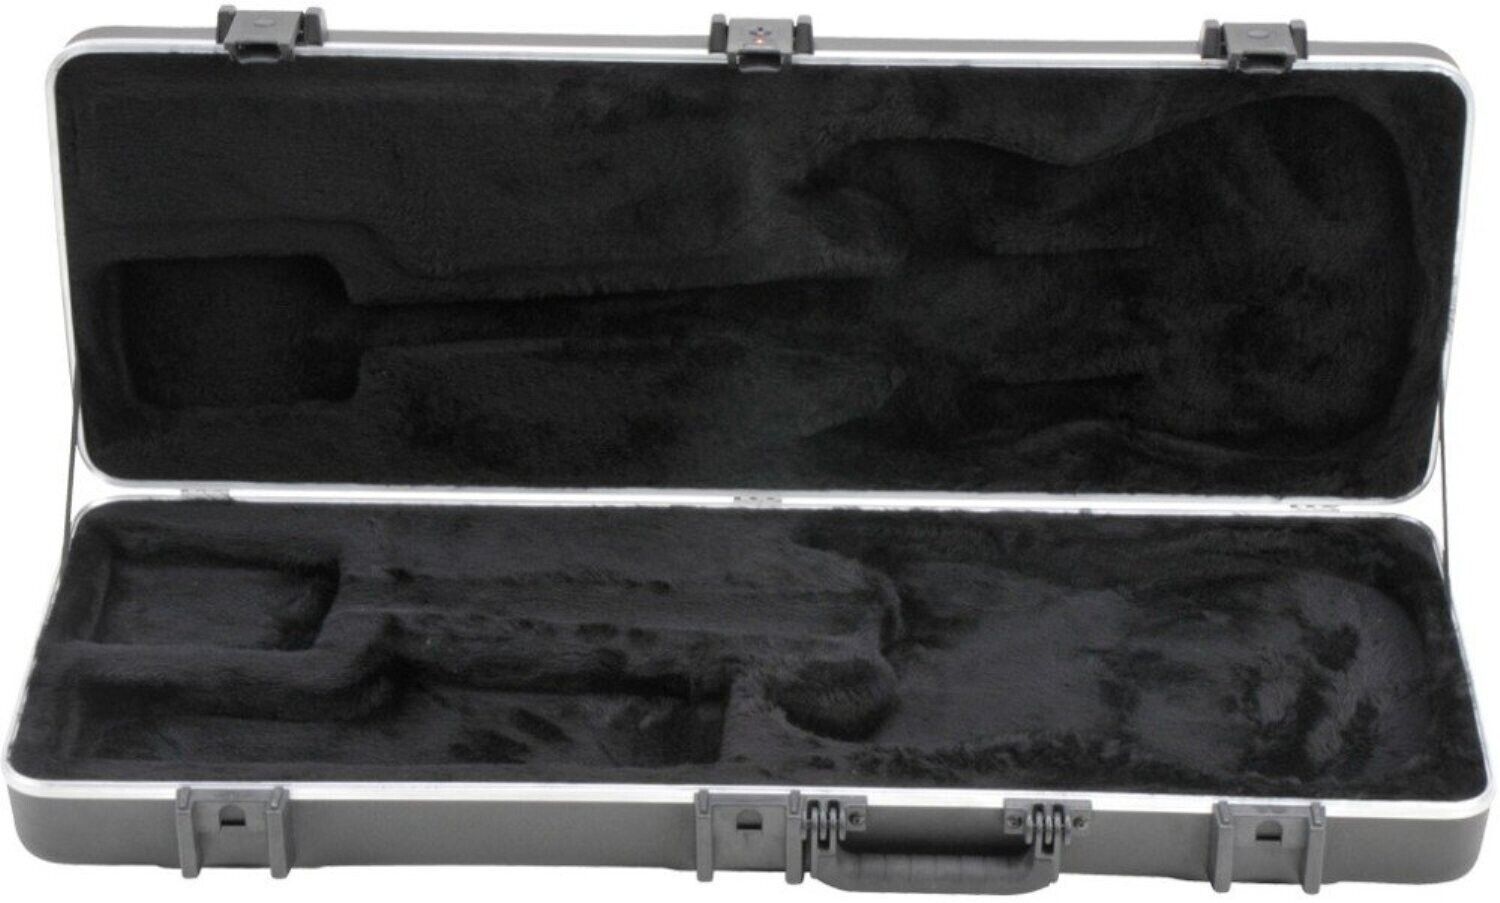 Primary image for SKB Cases 1SKB-66PRO Pro Rectangular Electric Guitar Case, ABS Exterior Shell